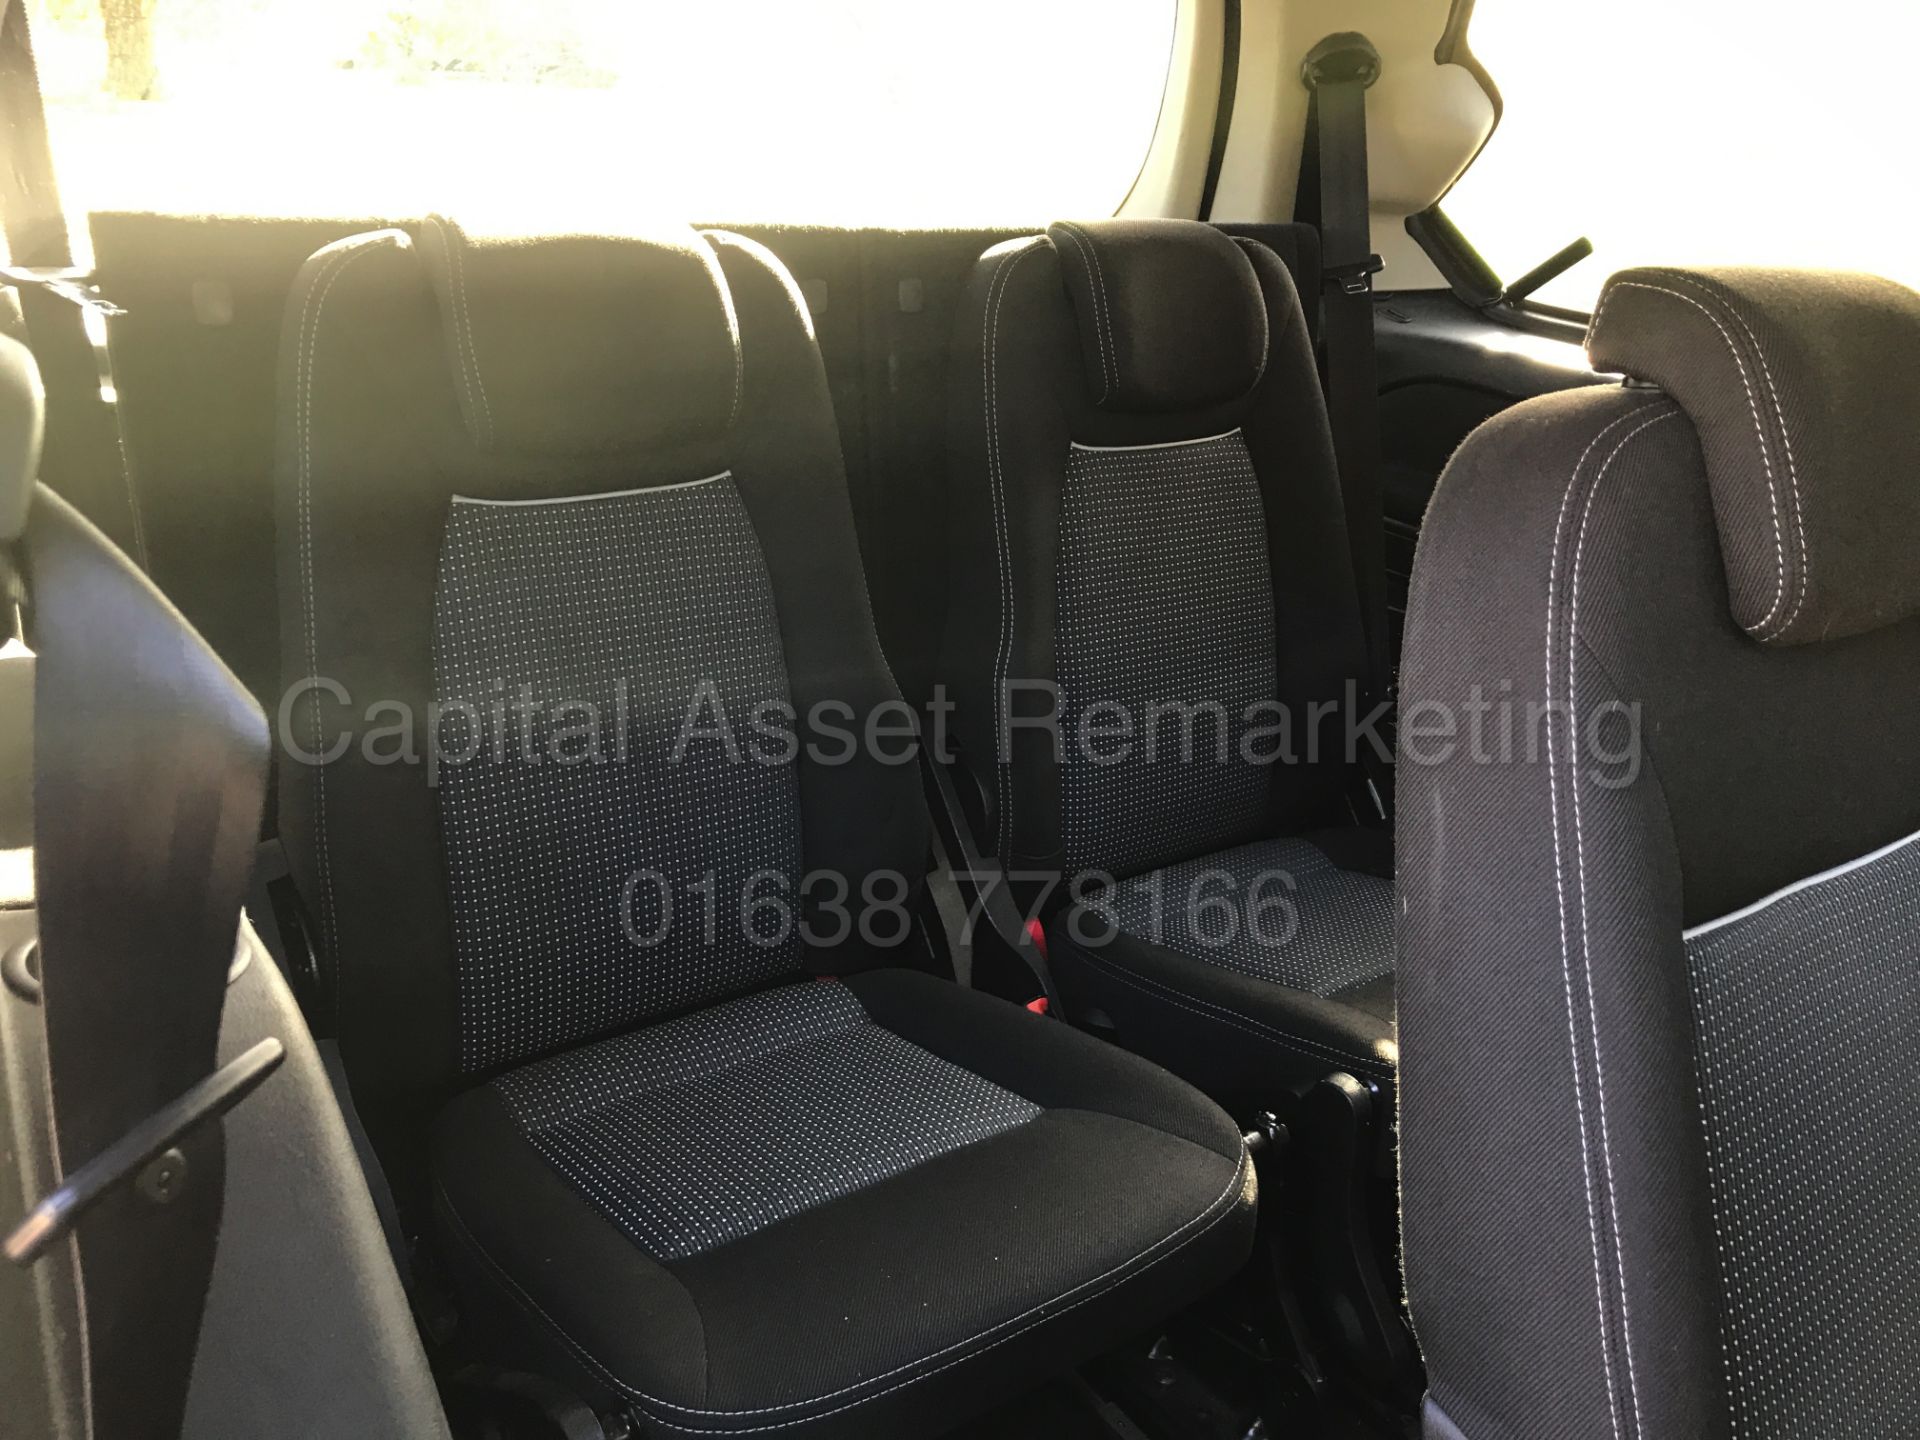 (ON SALE) FORD GALAXY 'ZETEC' 7 SEATER MPV (2014 MODEL) '2.0 TDCI -140 BHP' (1 OWNER) *FULL HISTORY* - Image 18 of 28